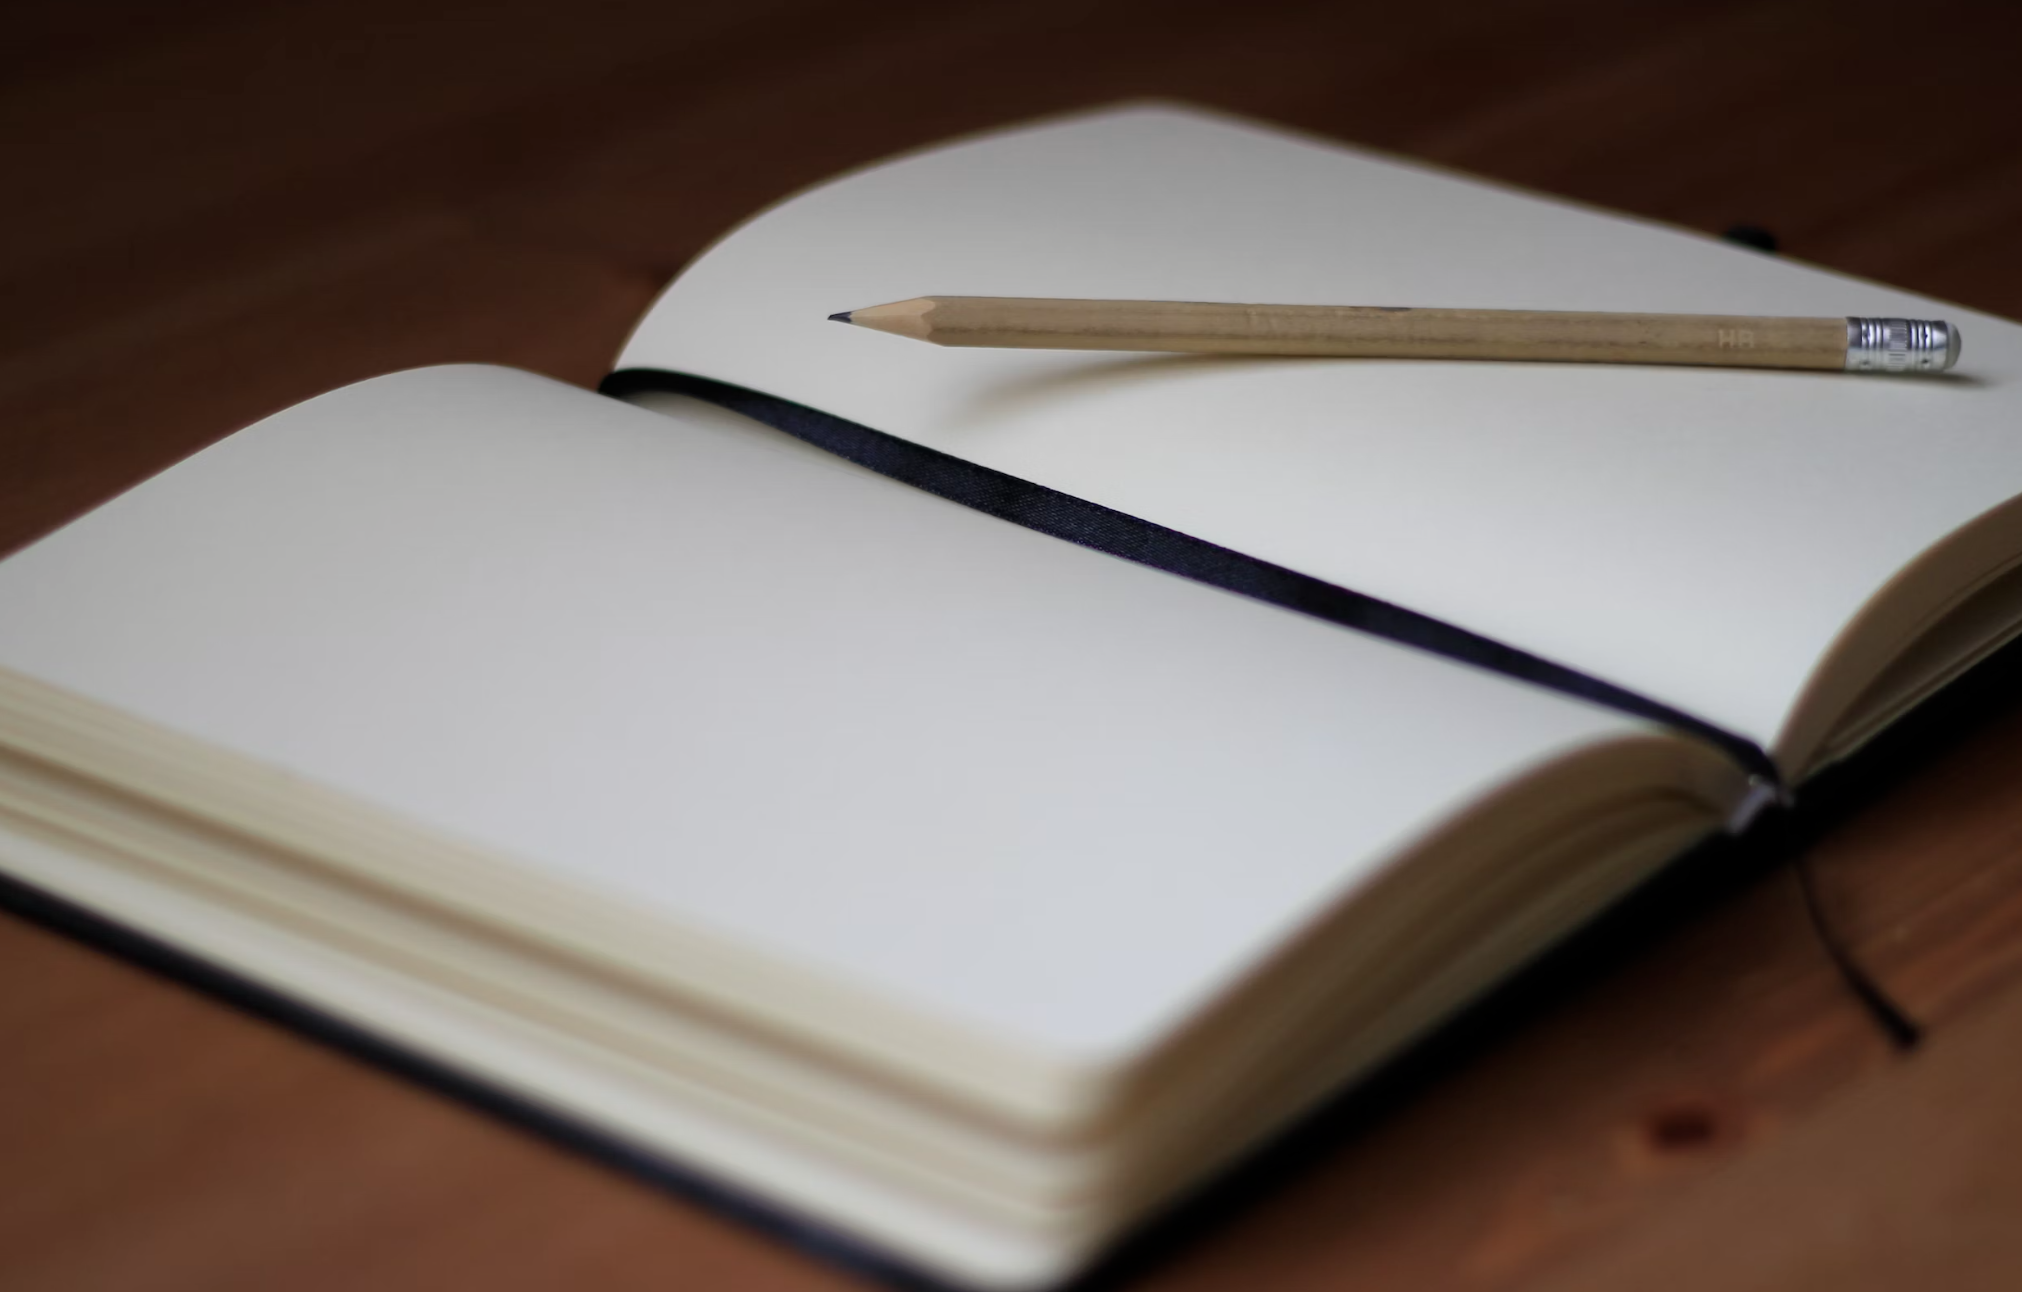 Write On: Amazon's Top Gifts for Journal Lovers